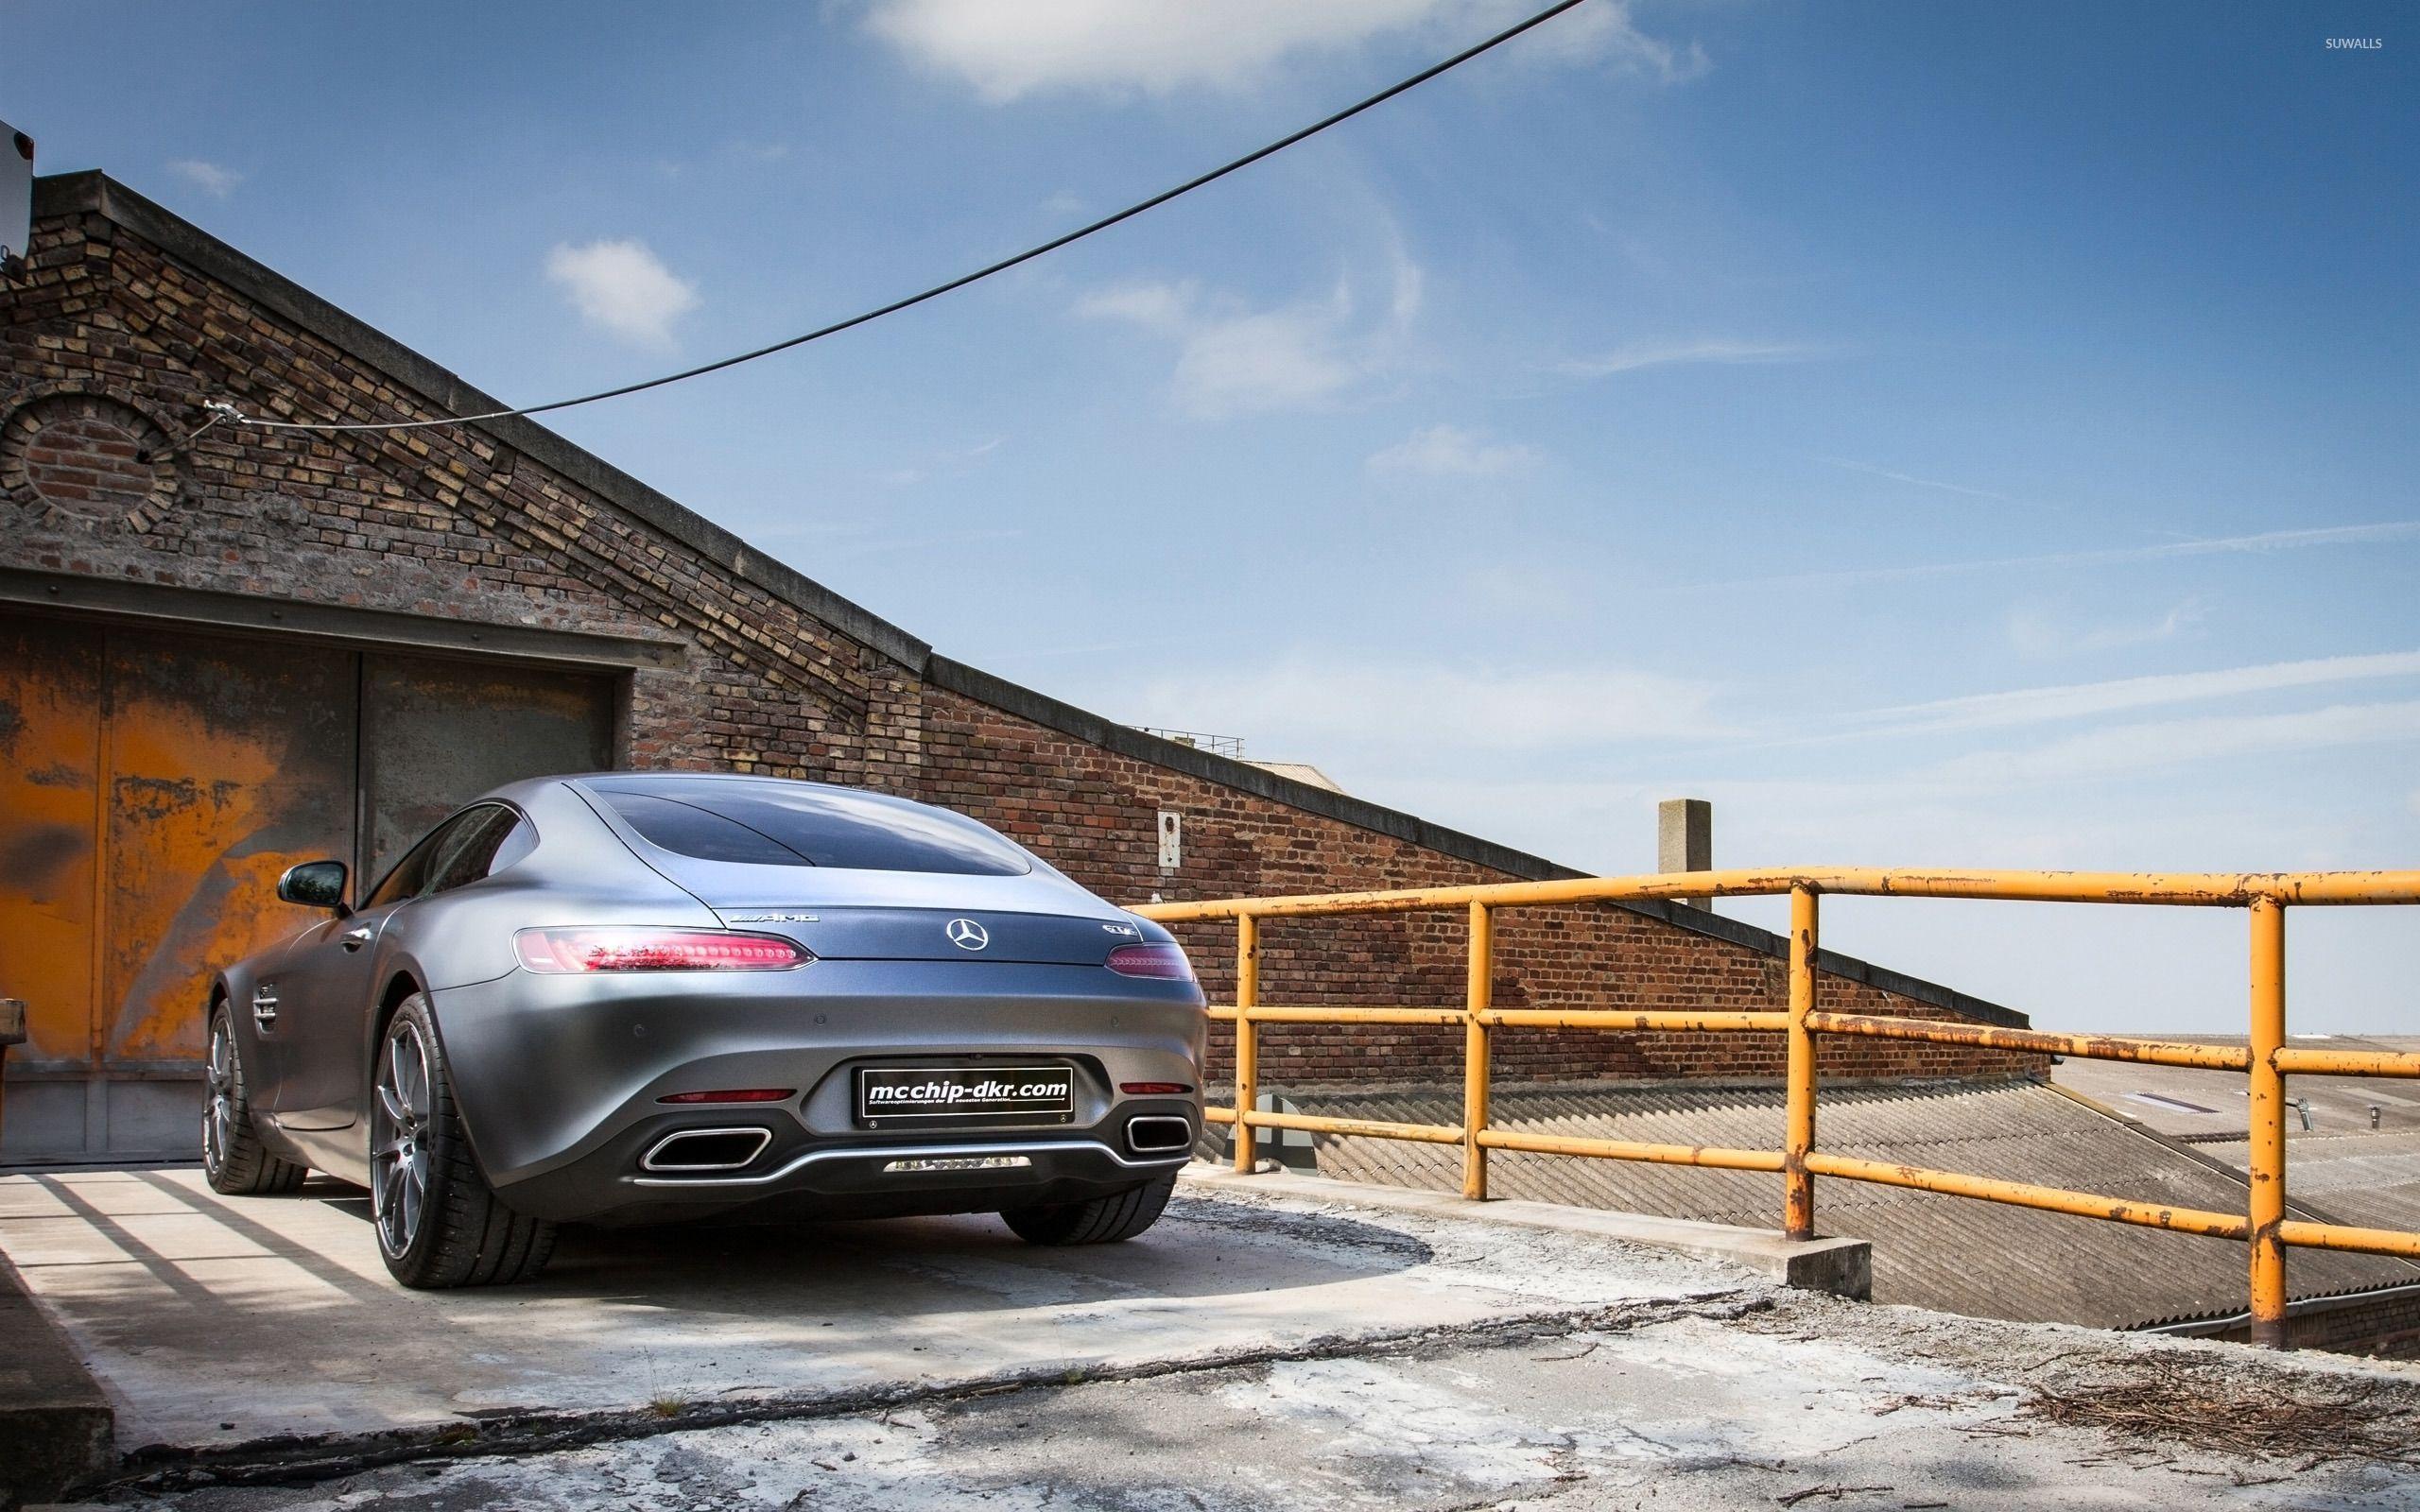 Mcchip DKR Mercedes AMG GT Back View From Distance Wallpaper